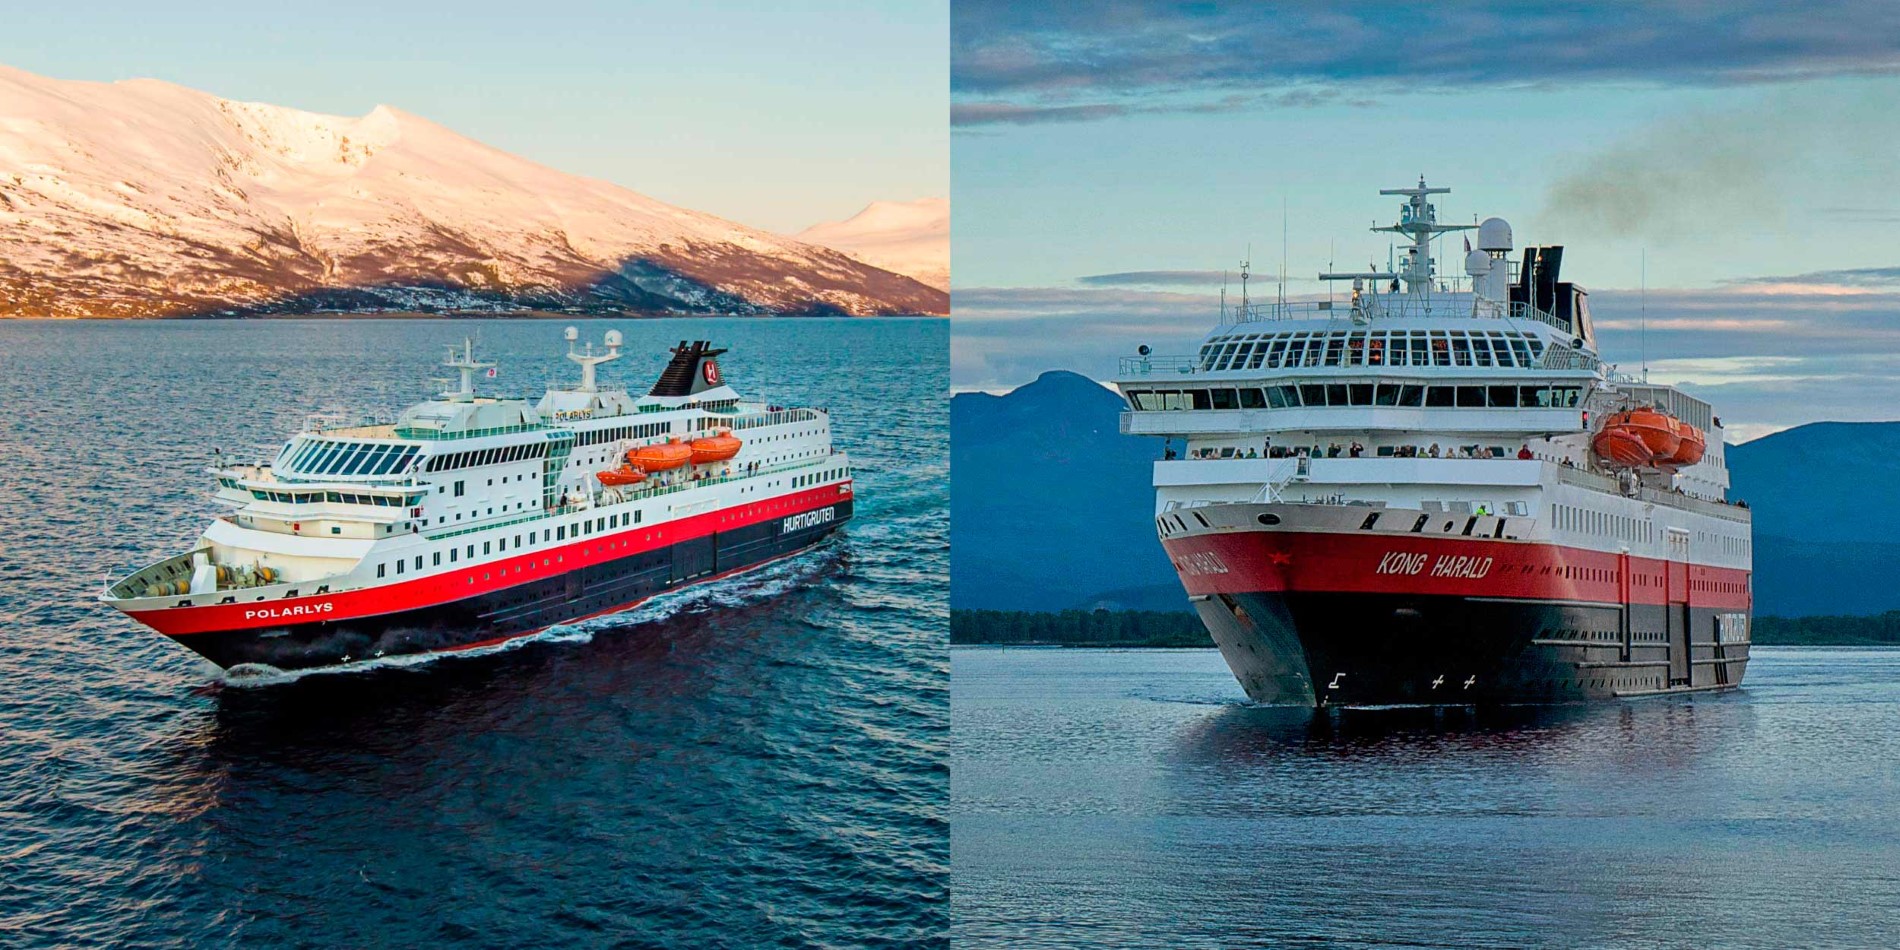 MS Polarlys and MS Kong Harald, our newly refurbished ships